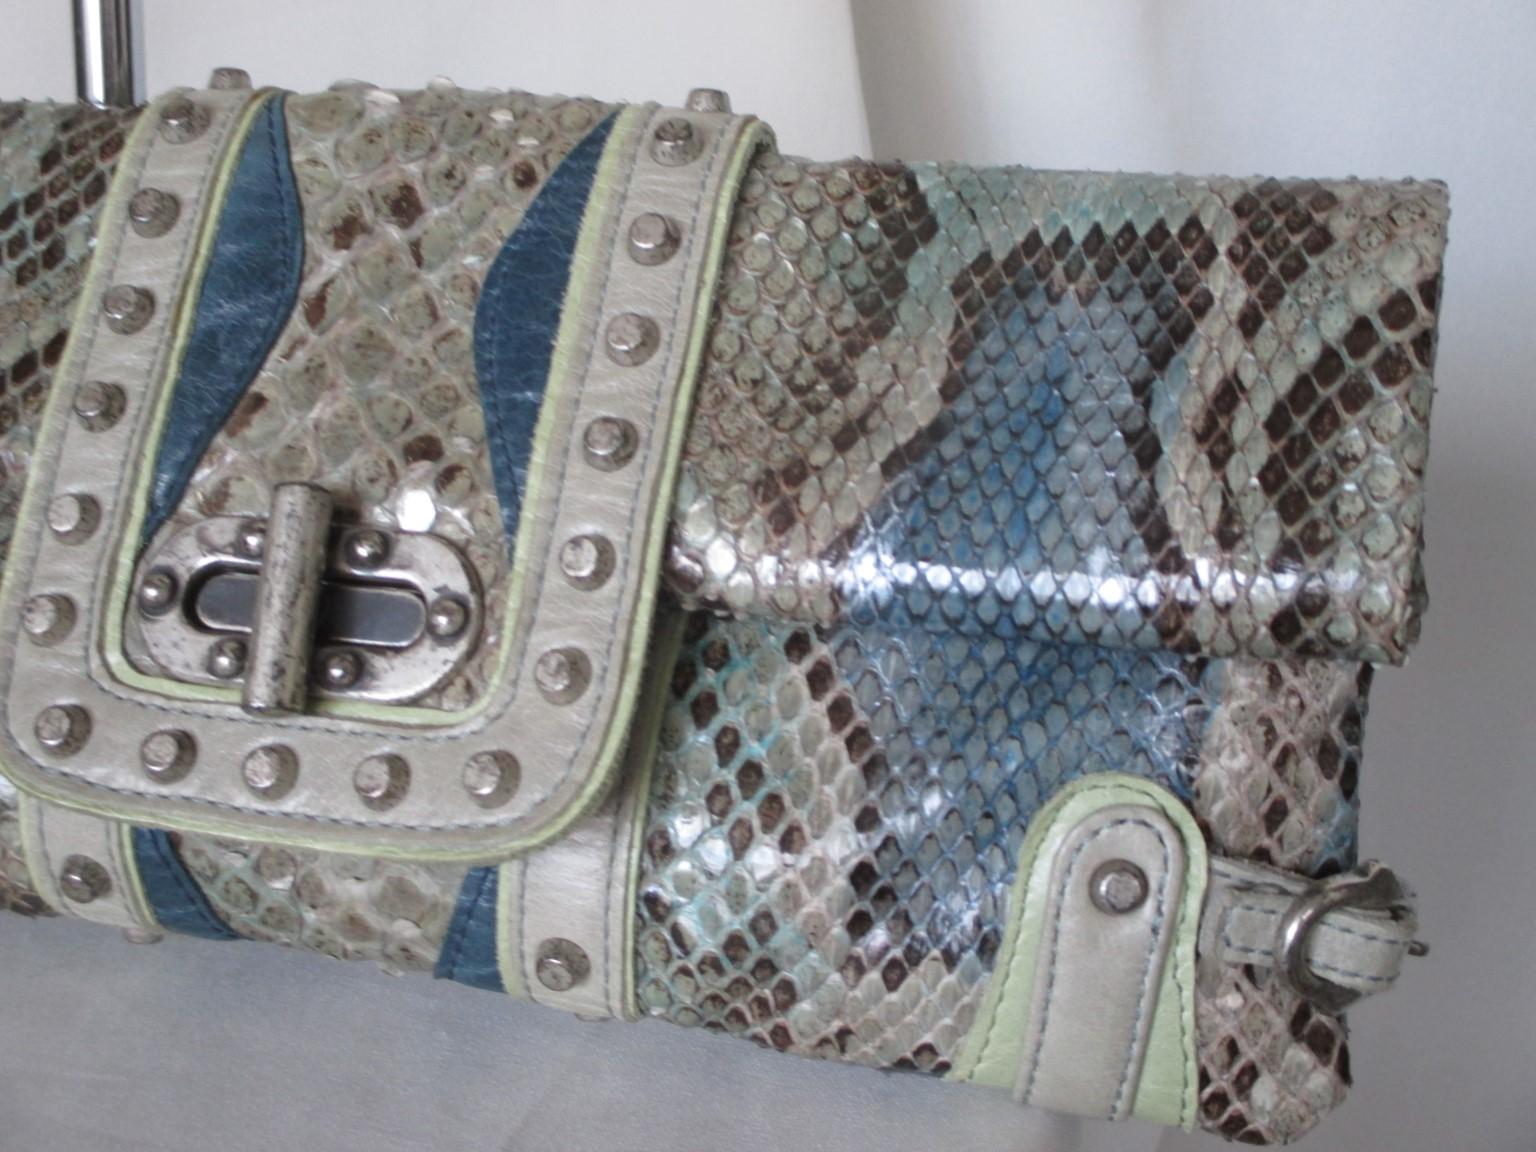 This unique clutch is made from dyed blue/grey/green/silver python leather.

We offer more luxury bags, fashion and furs, view our frontstore.

Details:
Fully lined 
With fringe and handle which are removable
Silver tone hardware/studs
Brand: